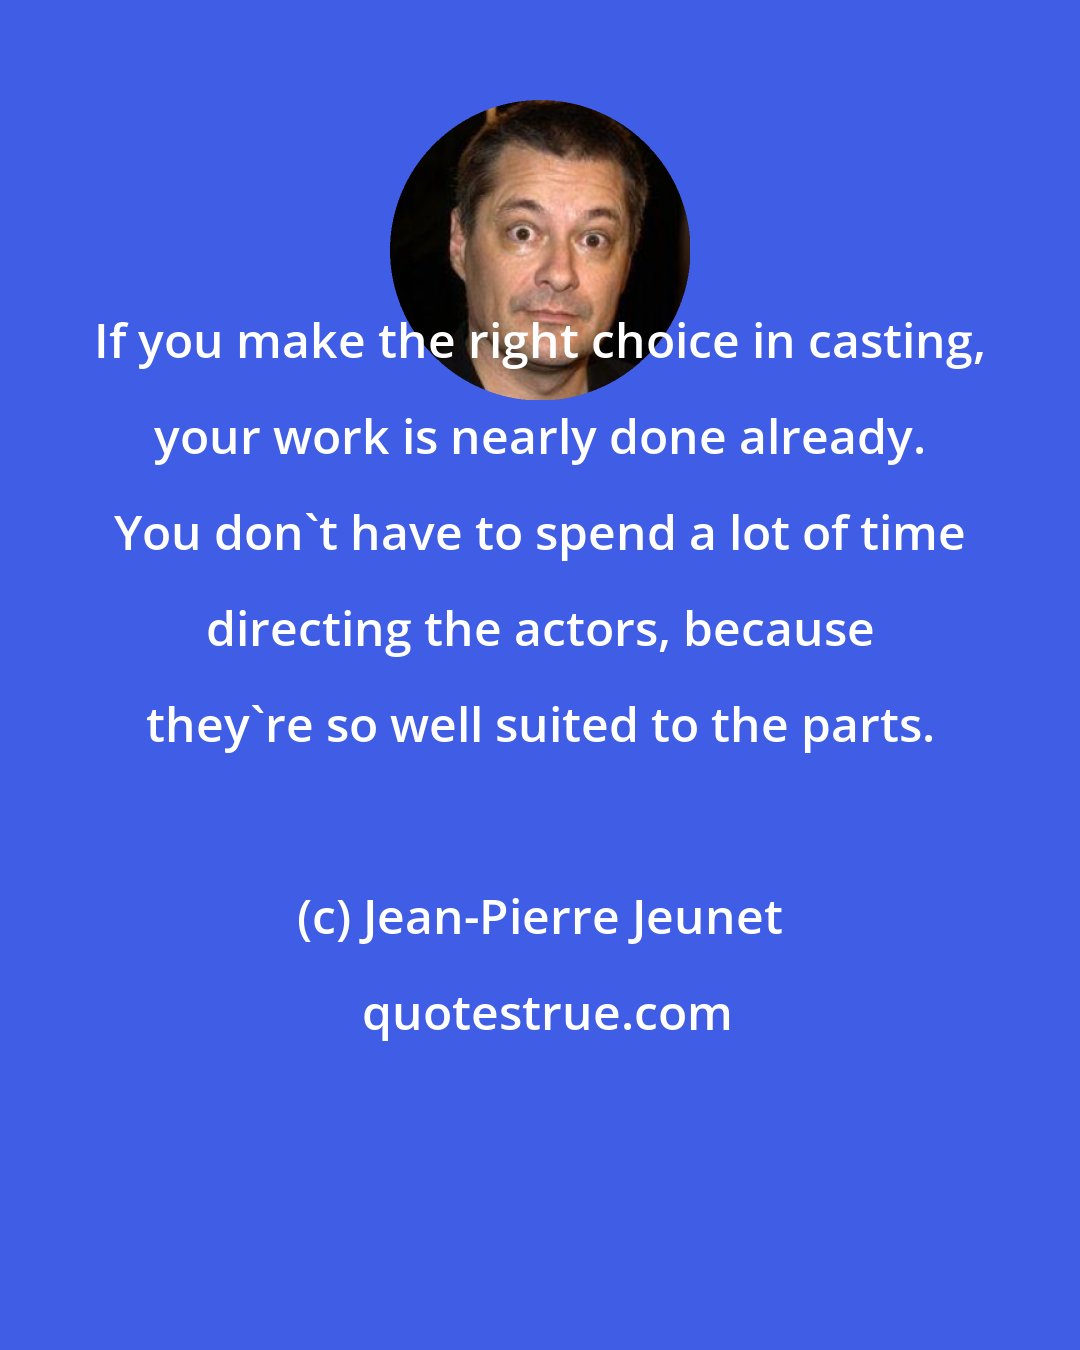 Jean-Pierre Jeunet: If you make the right choice in casting, your work is nearly done already. You don't have to spend a lot of time directing the actors, because they're so well suited to the parts.